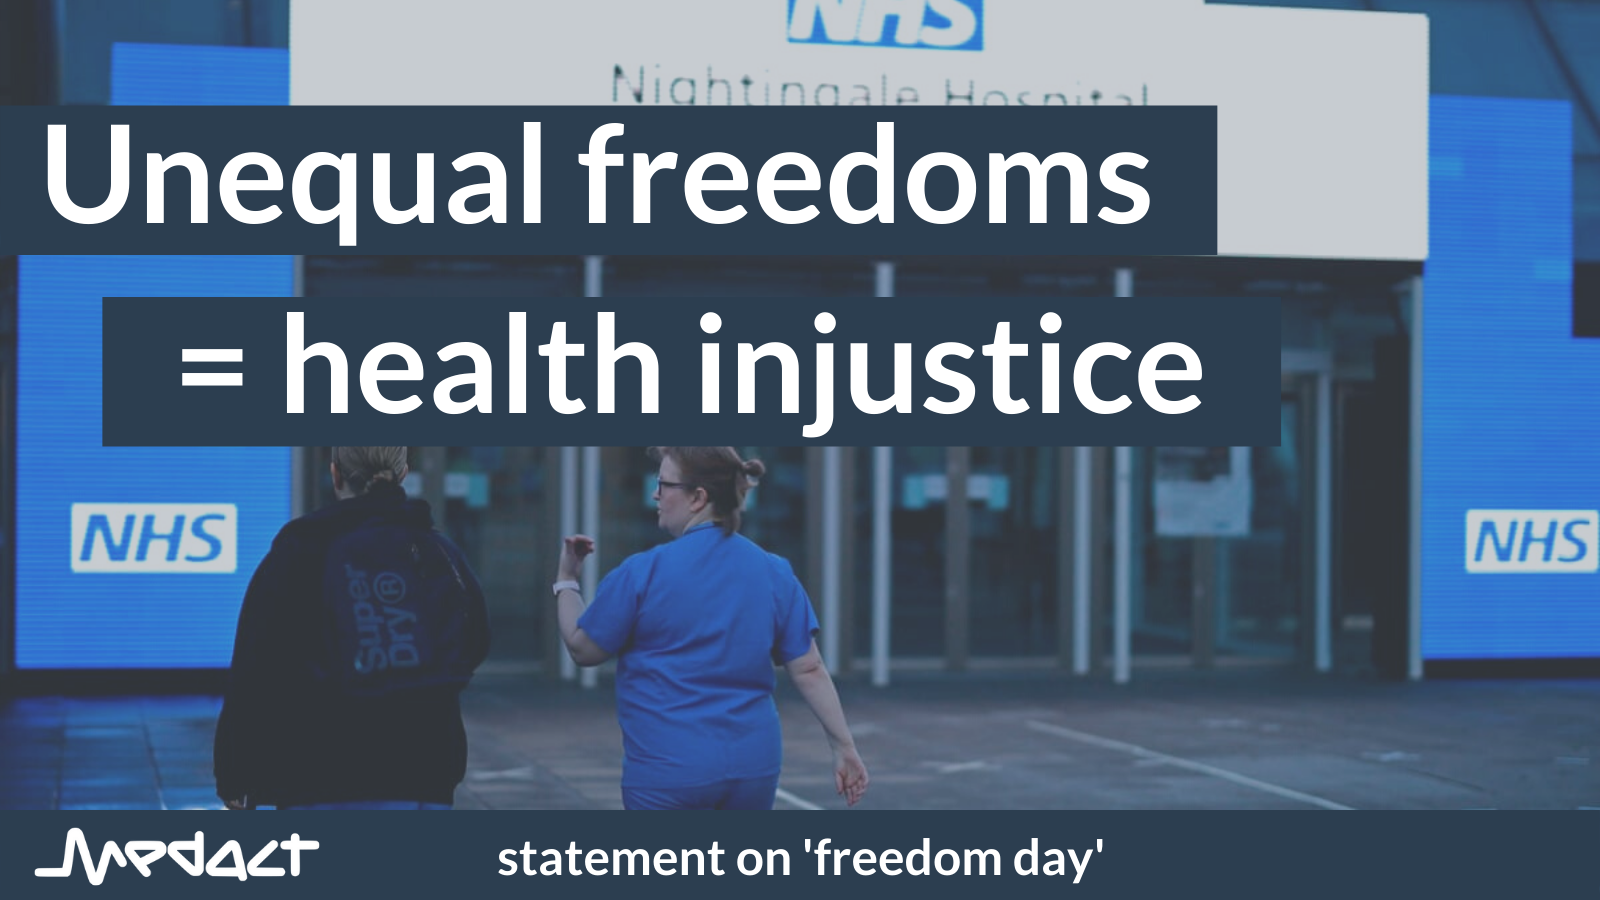 Freedom day: Unequal freedoms = health injustice